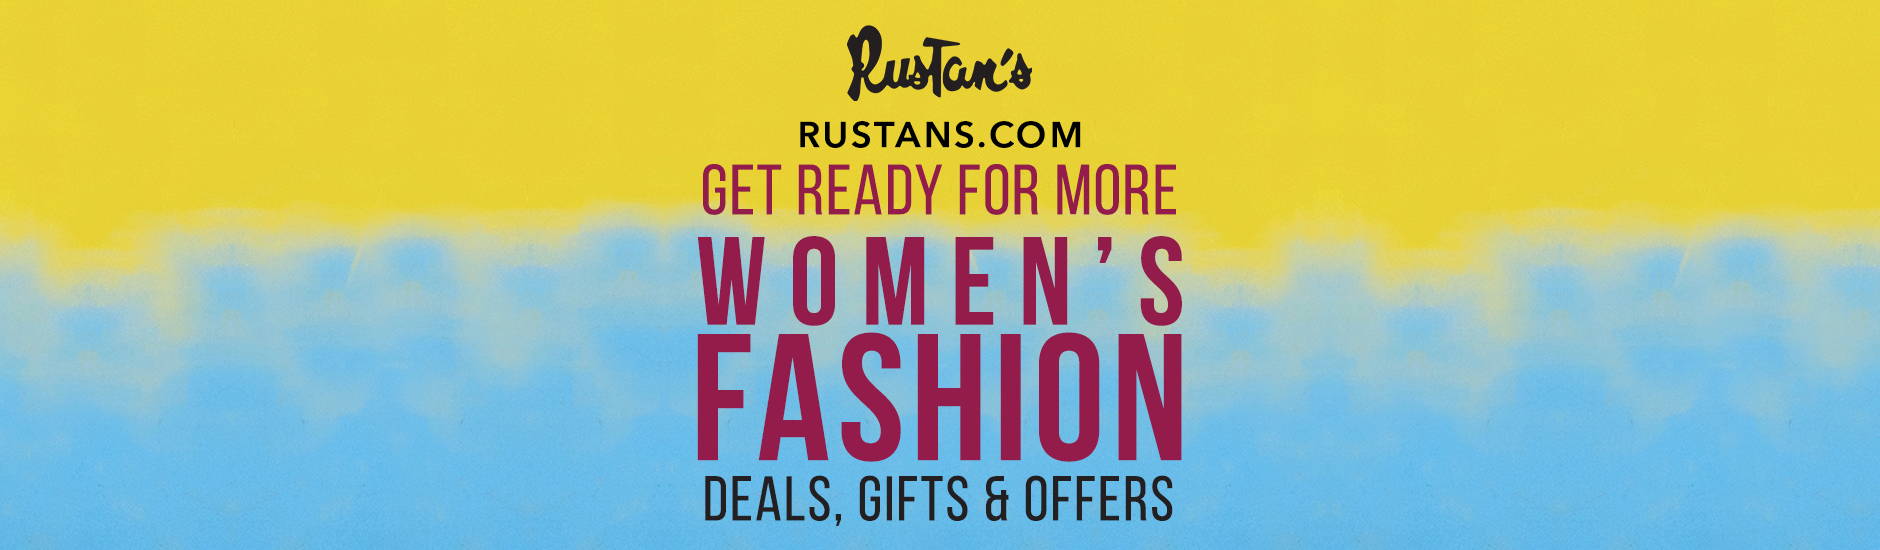 Get Ready for More Deals, Gifts & Offers: Women's Fashion